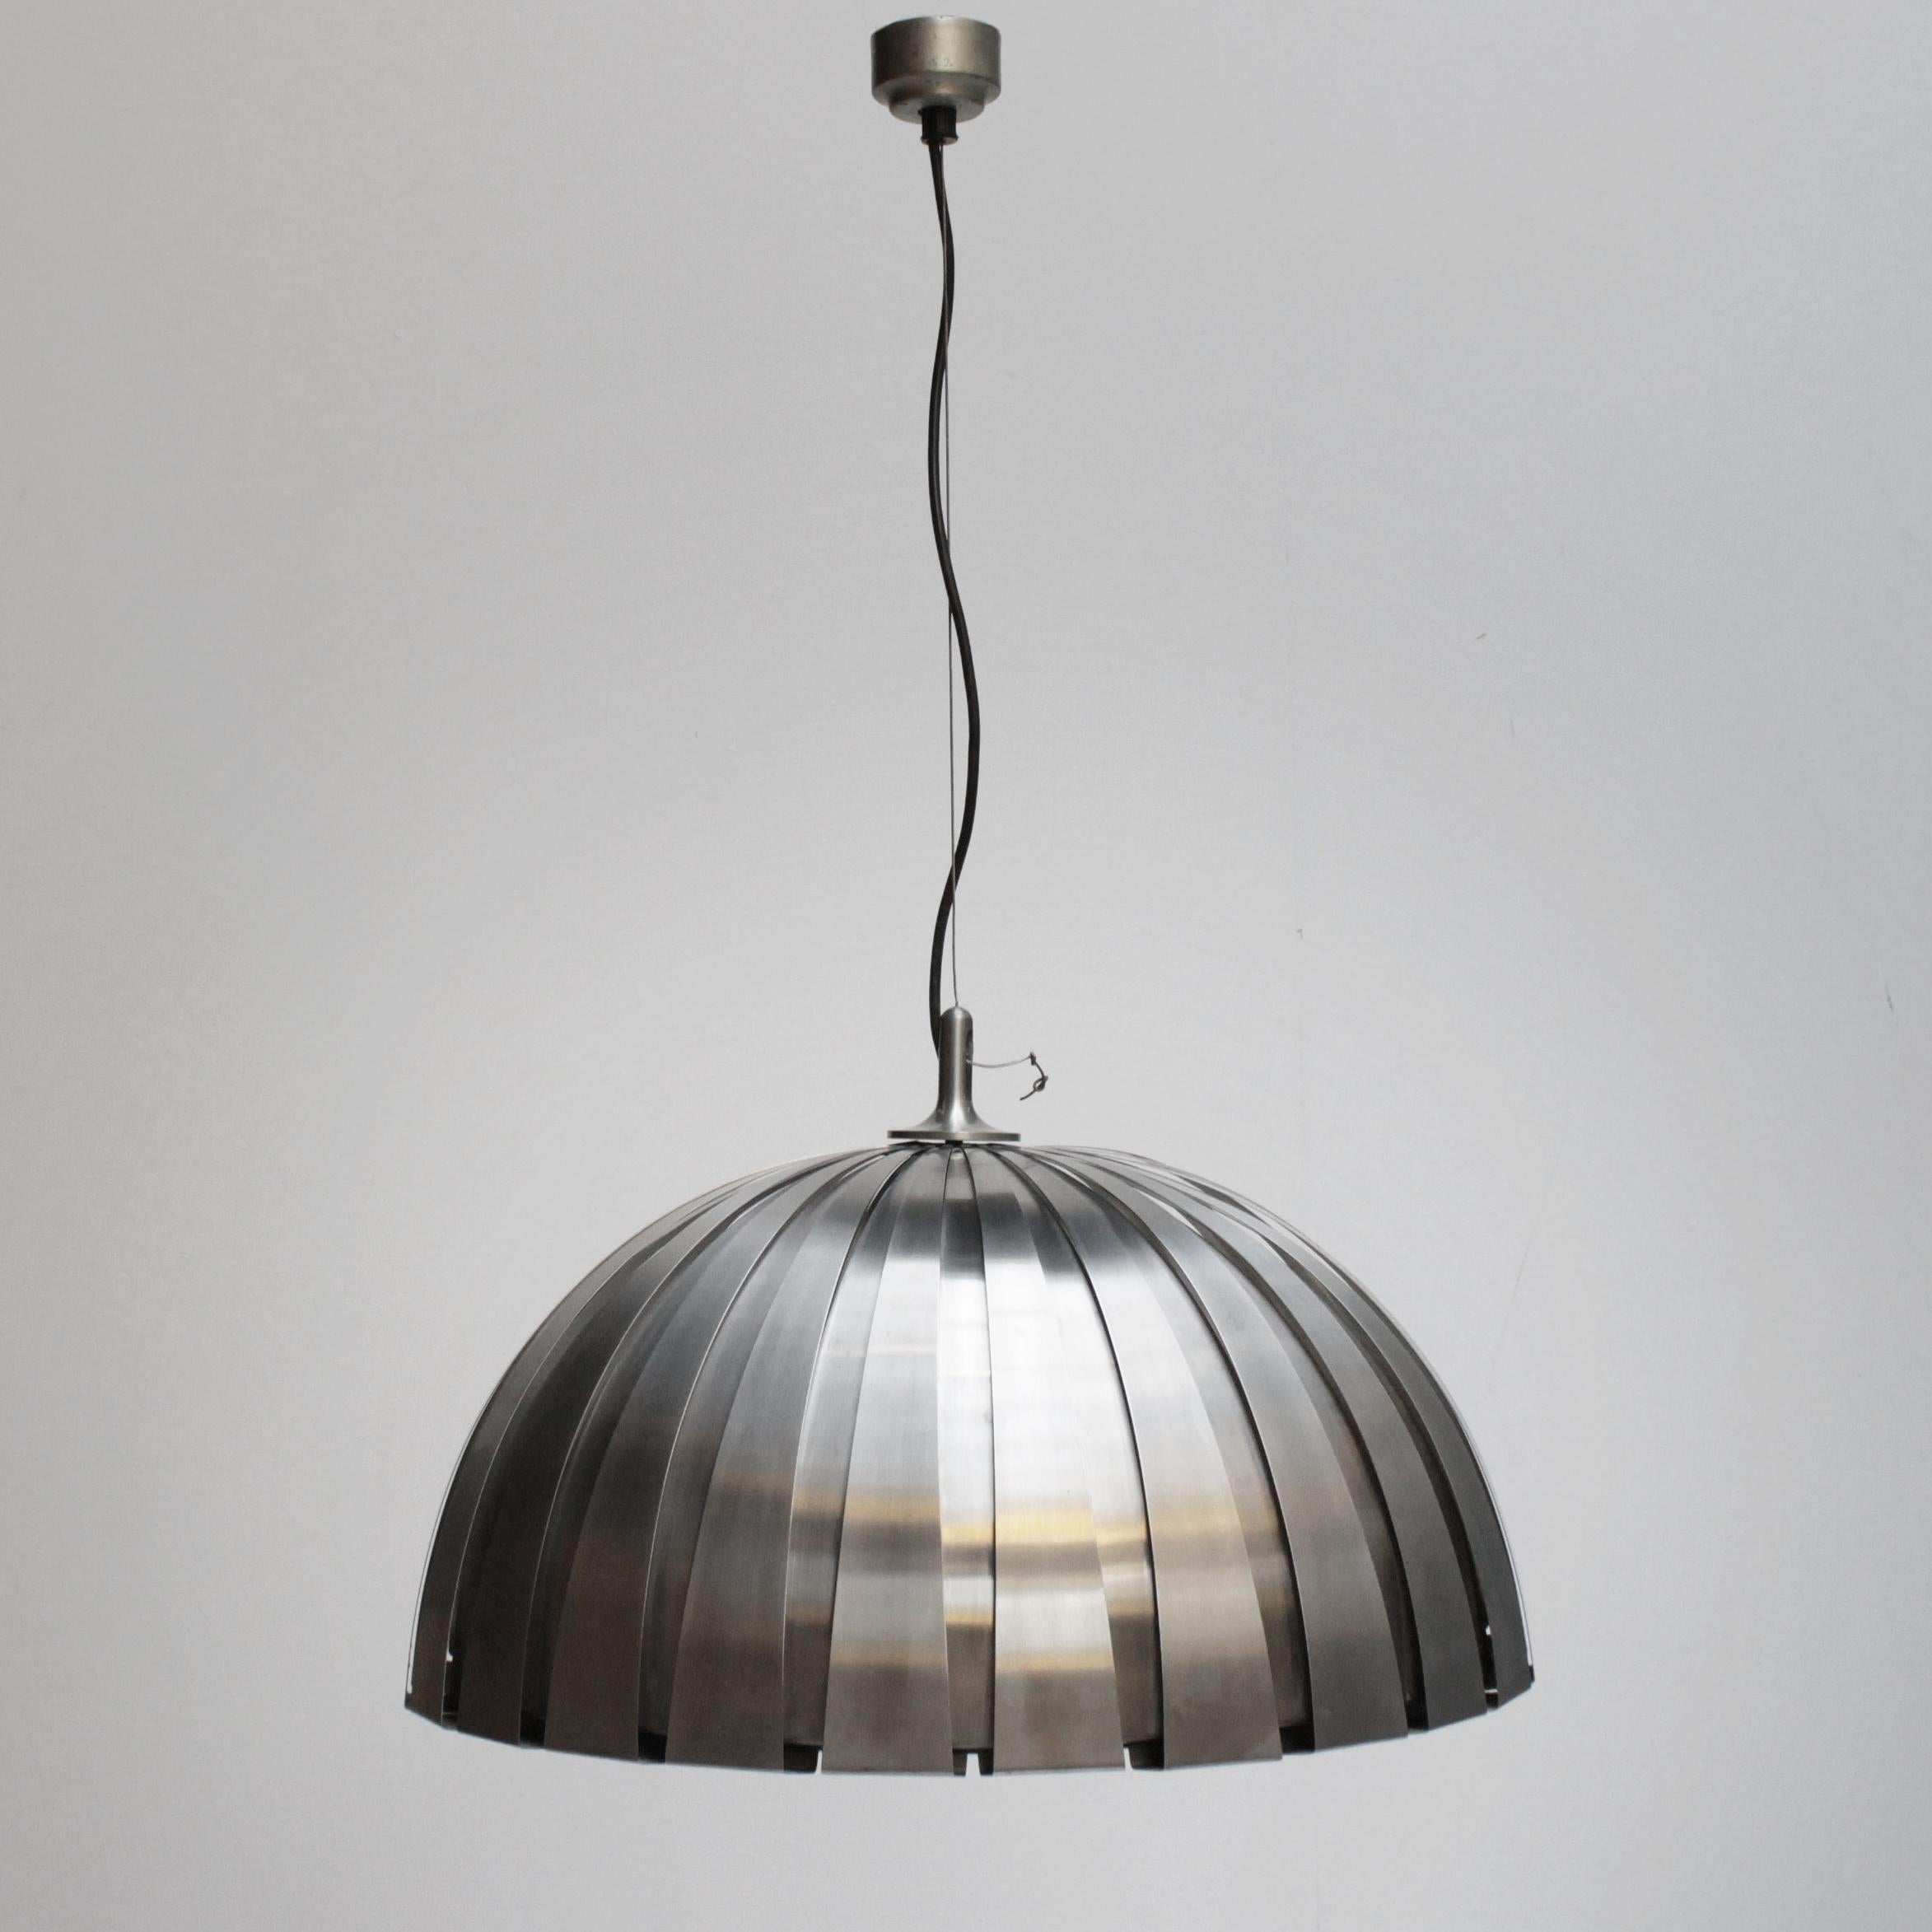 Calotta model 1749 pendant by Elio Martinelli for Martinelli Luce, in brushed stainless steel.
Dimensions: Height 12.6 in. (32 cm), diameter: 21.8 inches (55,5 cm).
Elio Martinelli (1922-2004) was trained as a set designer, but gained experience in